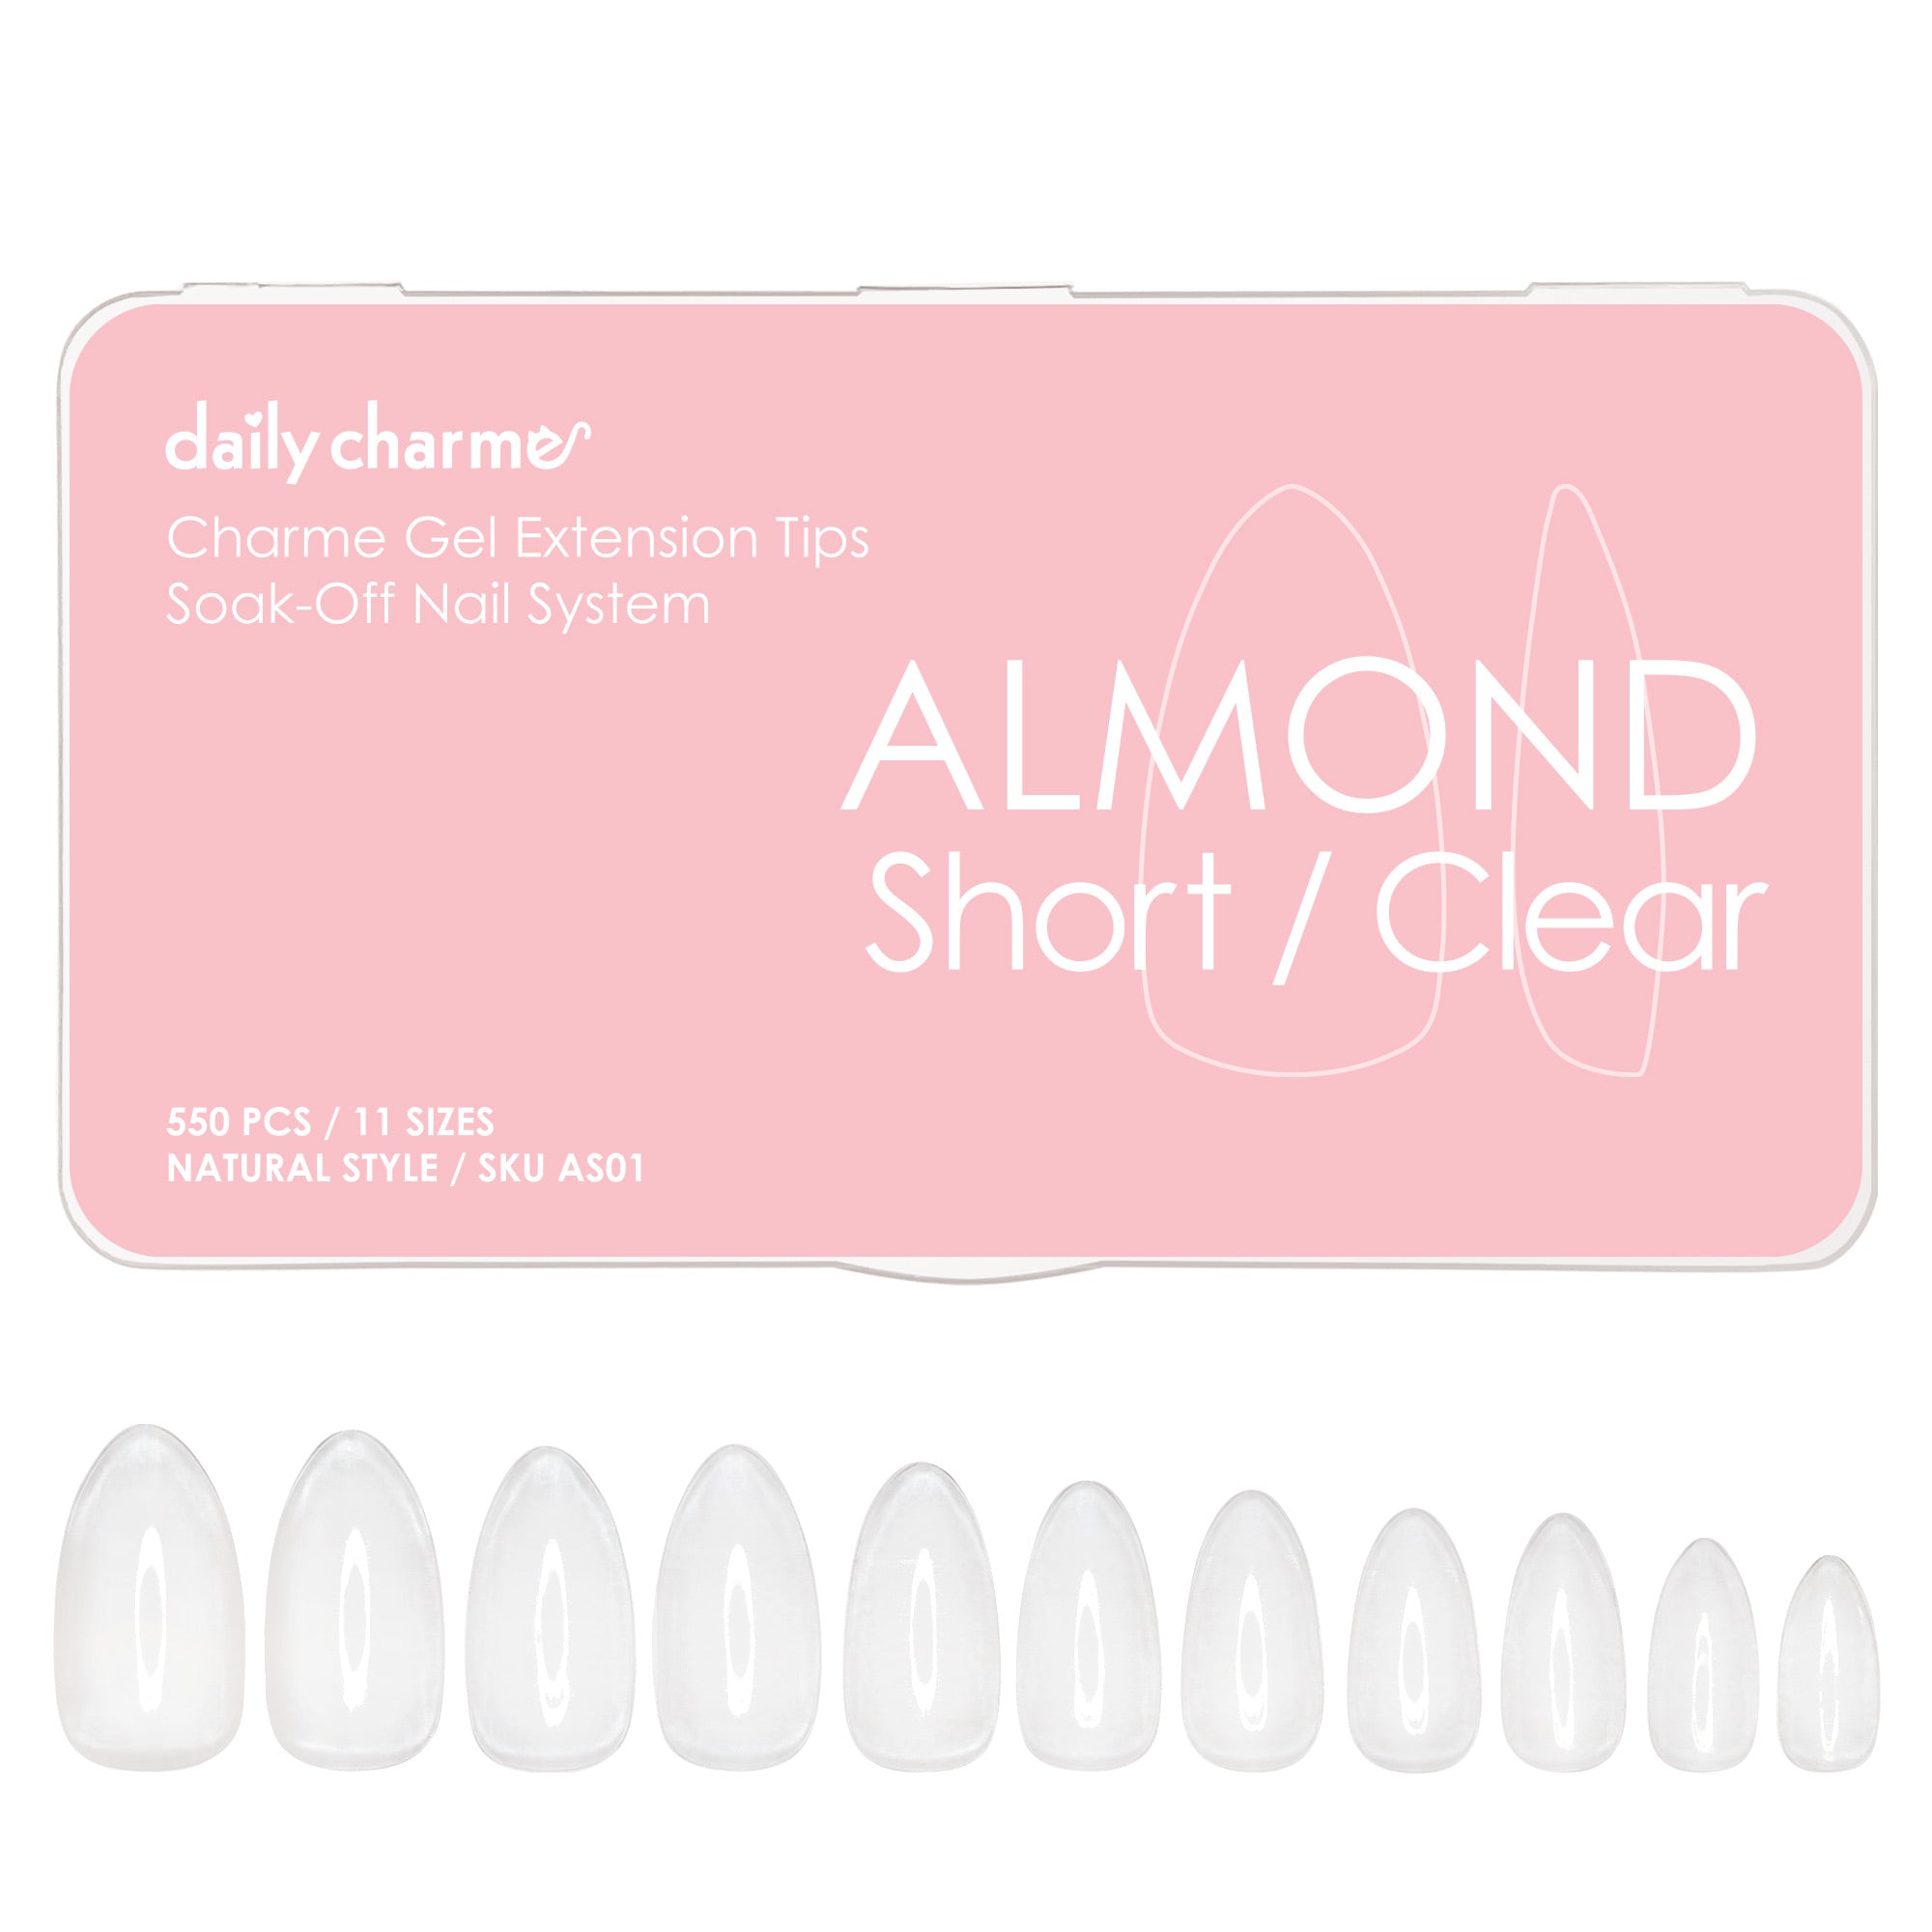 Charme Gel Extension Tips / Almond / Short / Clear